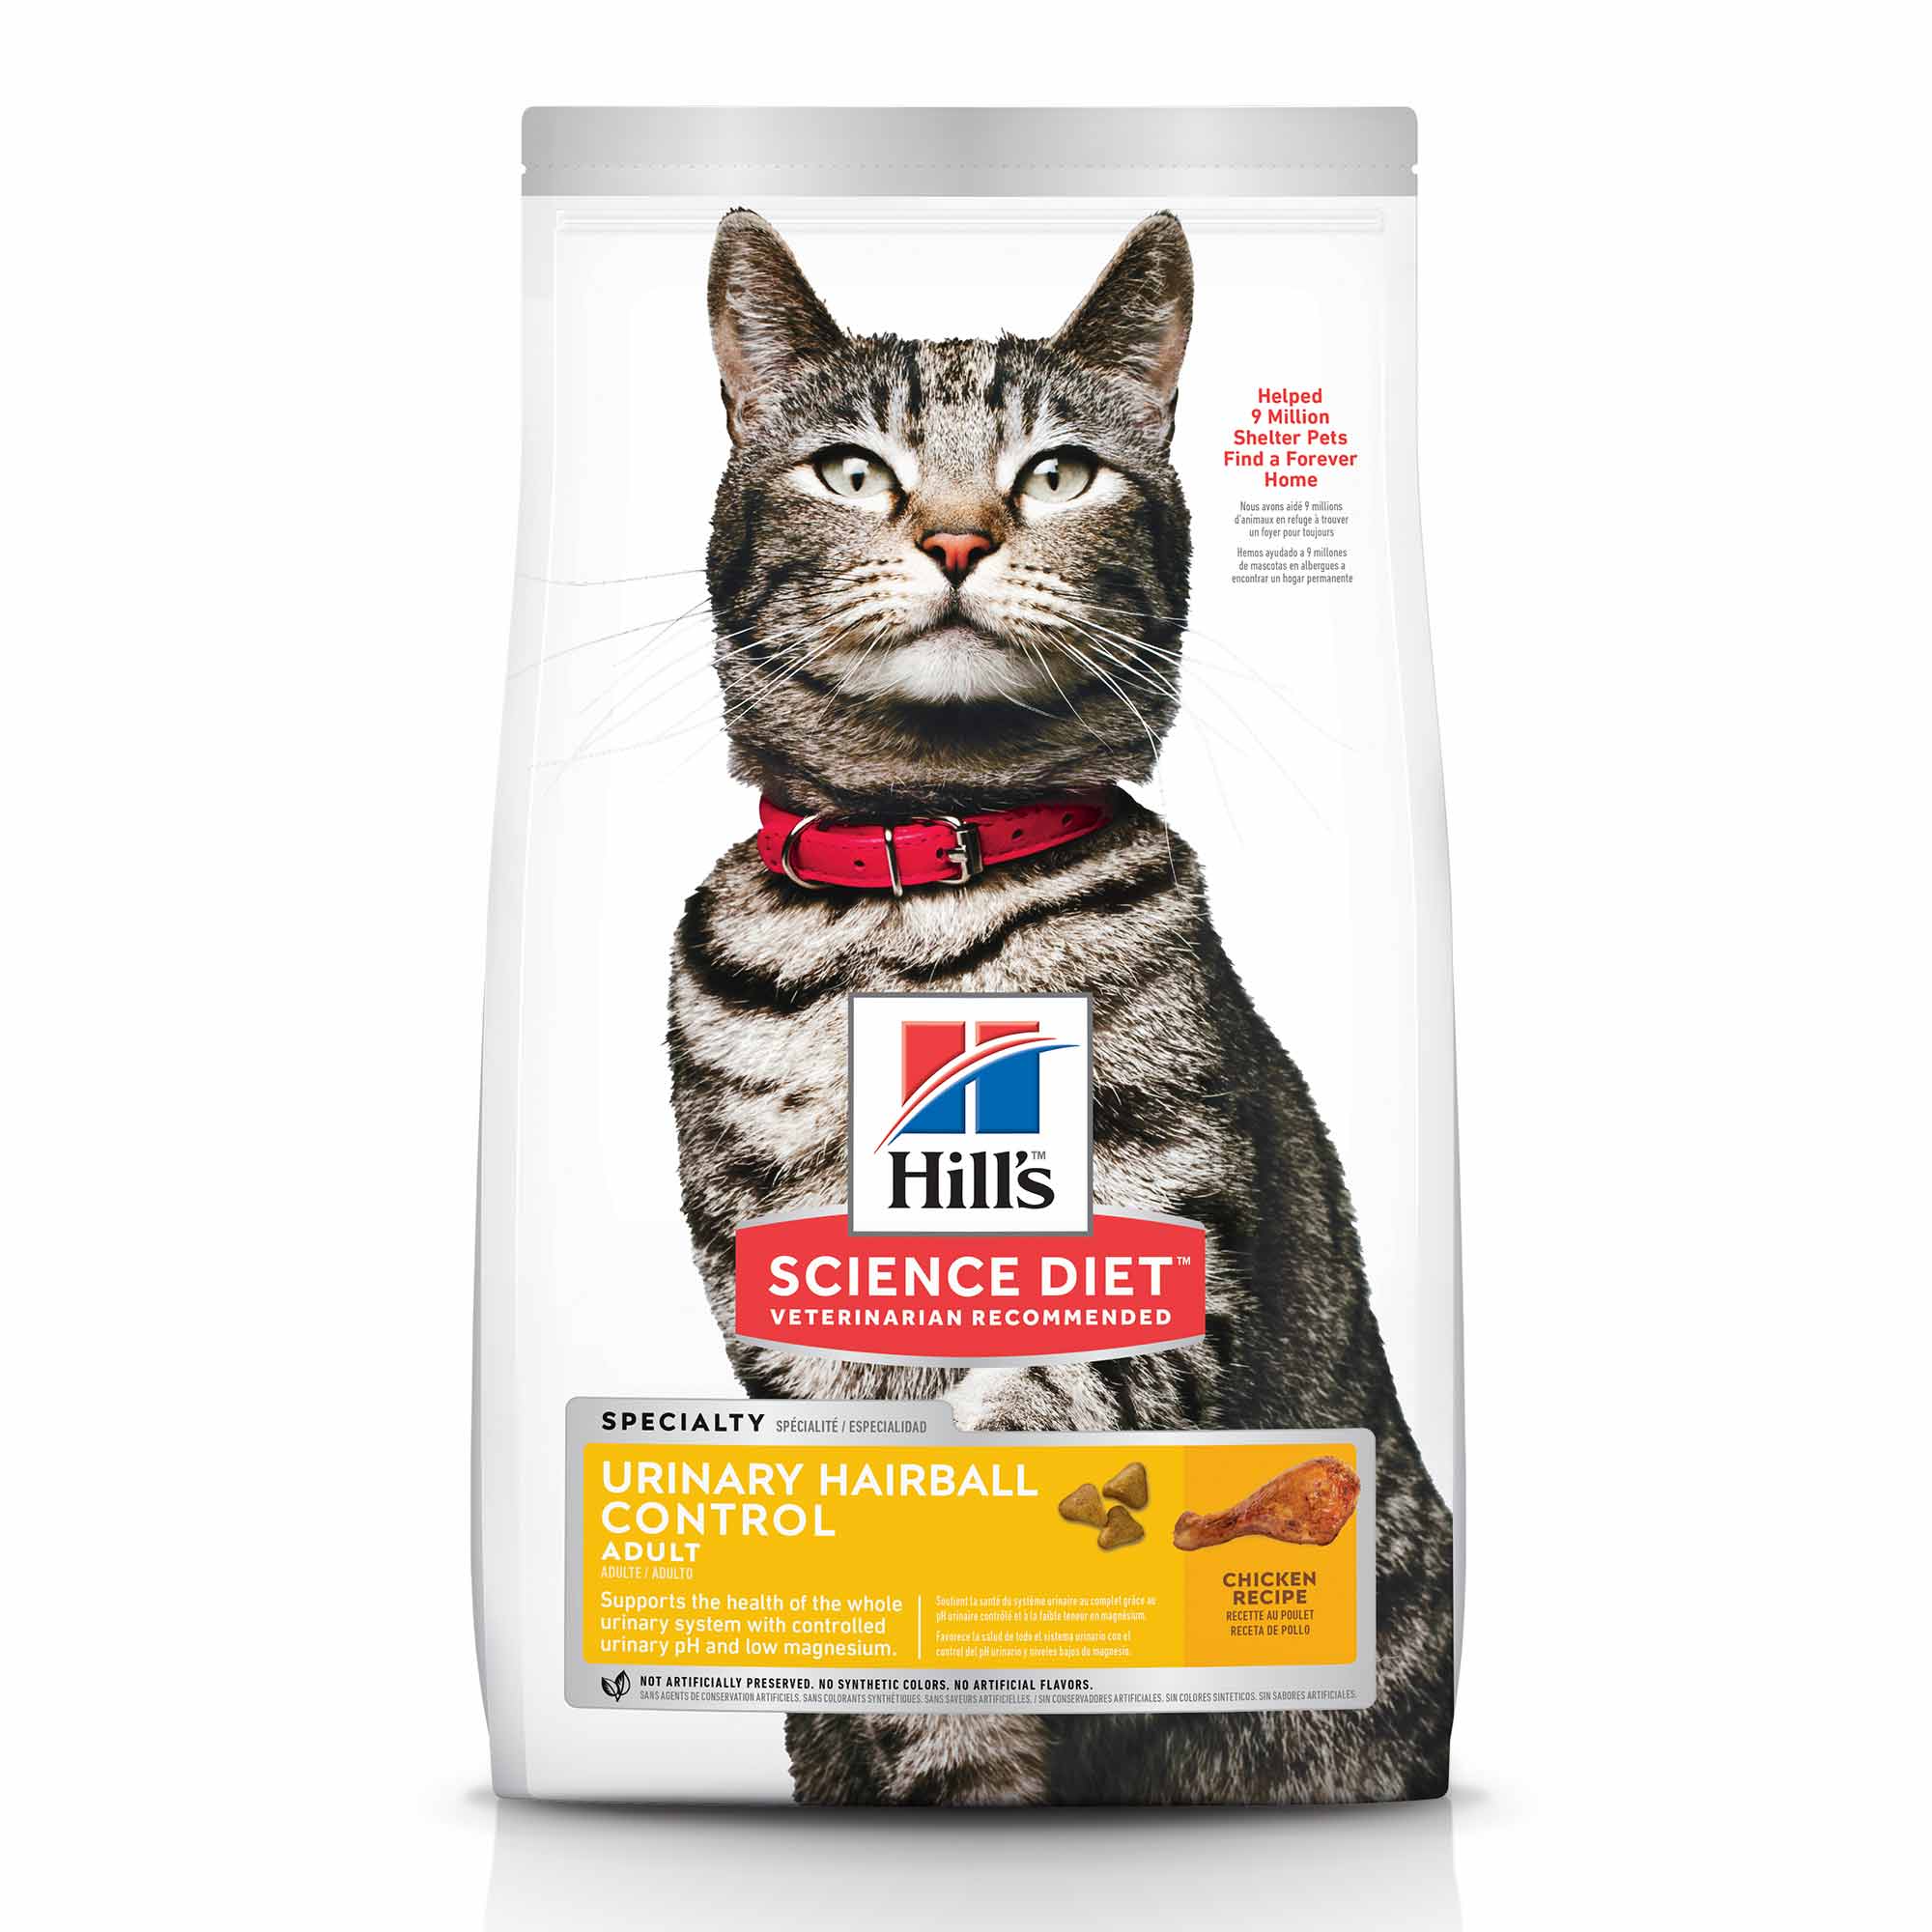 Hill's® Science Diet® Adult Urinary & Hairball Control, 7 Pound Bag